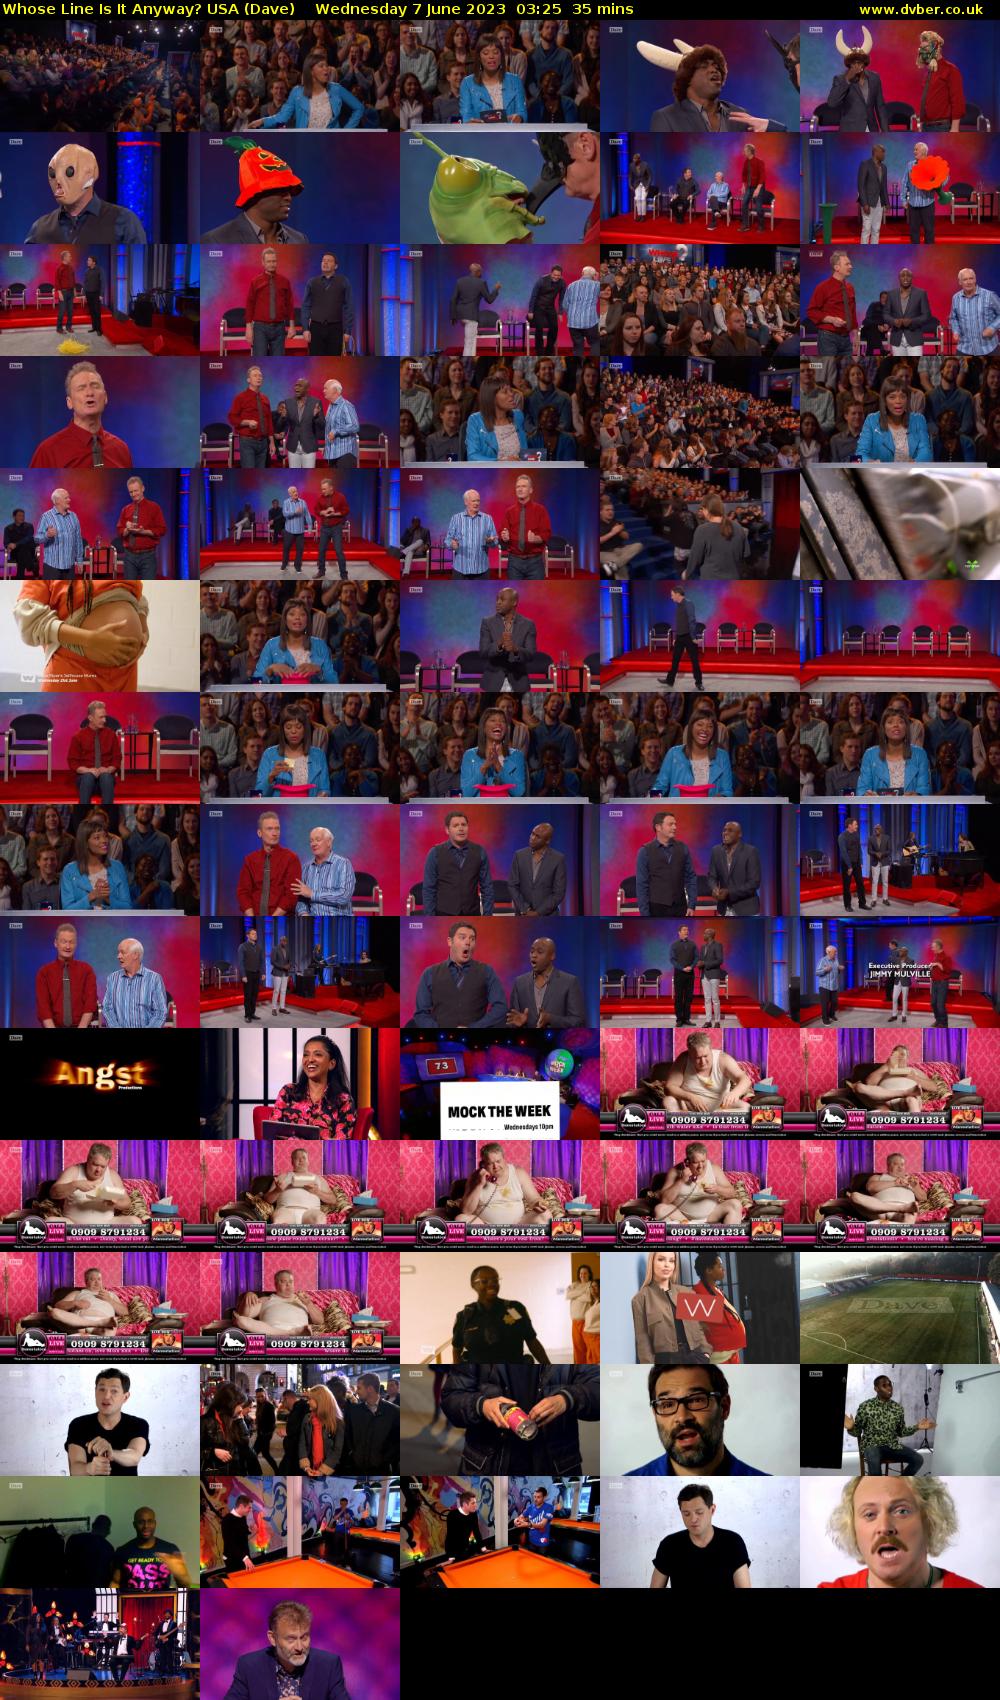 Whose Line Is It Anyway? USA (Dave) Wednesday 7 June 2023 03:25 - 04:00